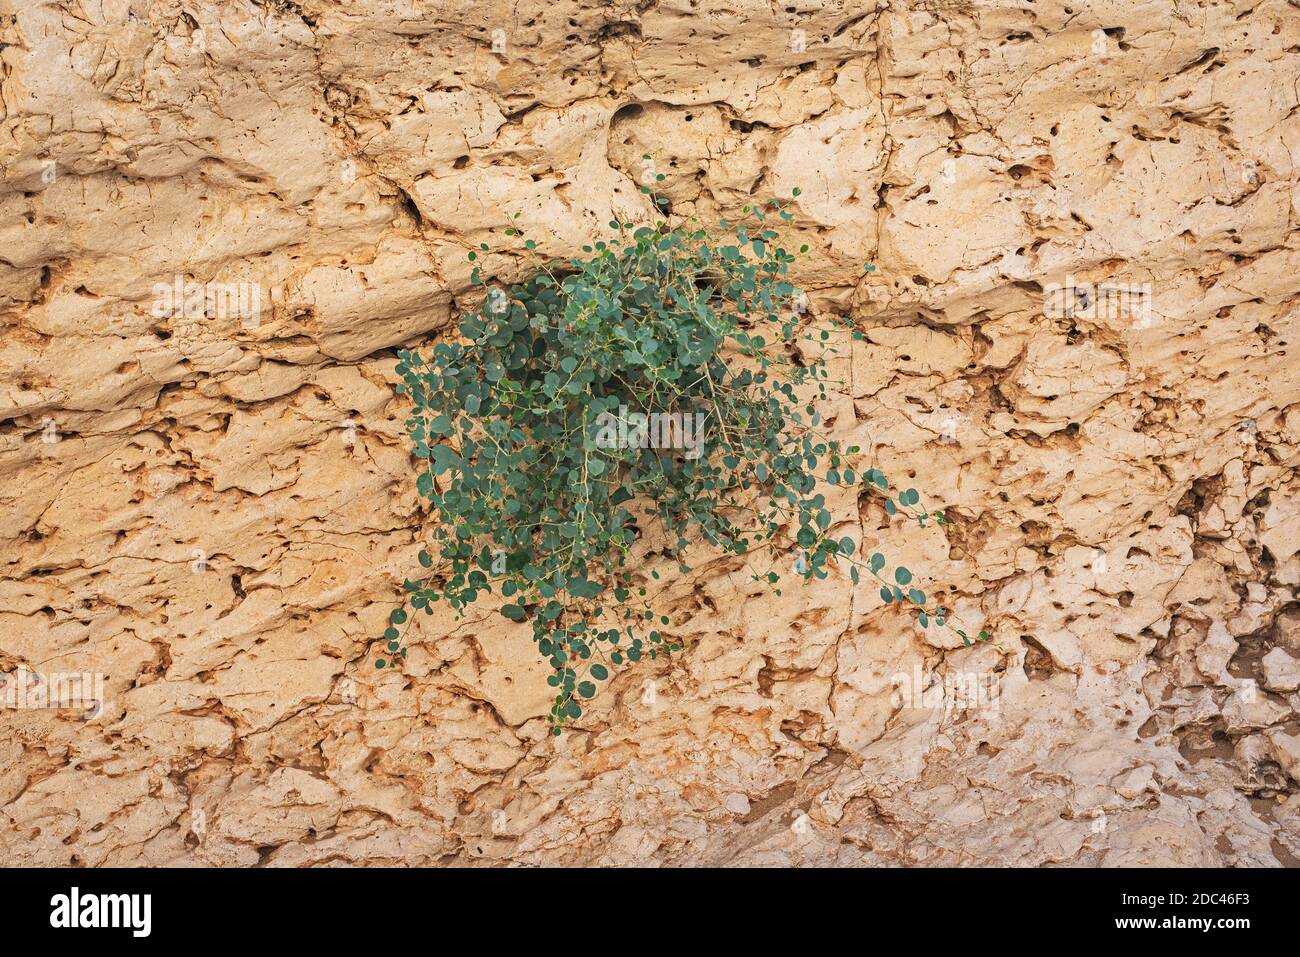 a small blue-green caper bush clings to a fossilized limestone cliff in the nahal nekarot (crevices) stream bed in the makhtesh ramon crater in israel Stock Photo